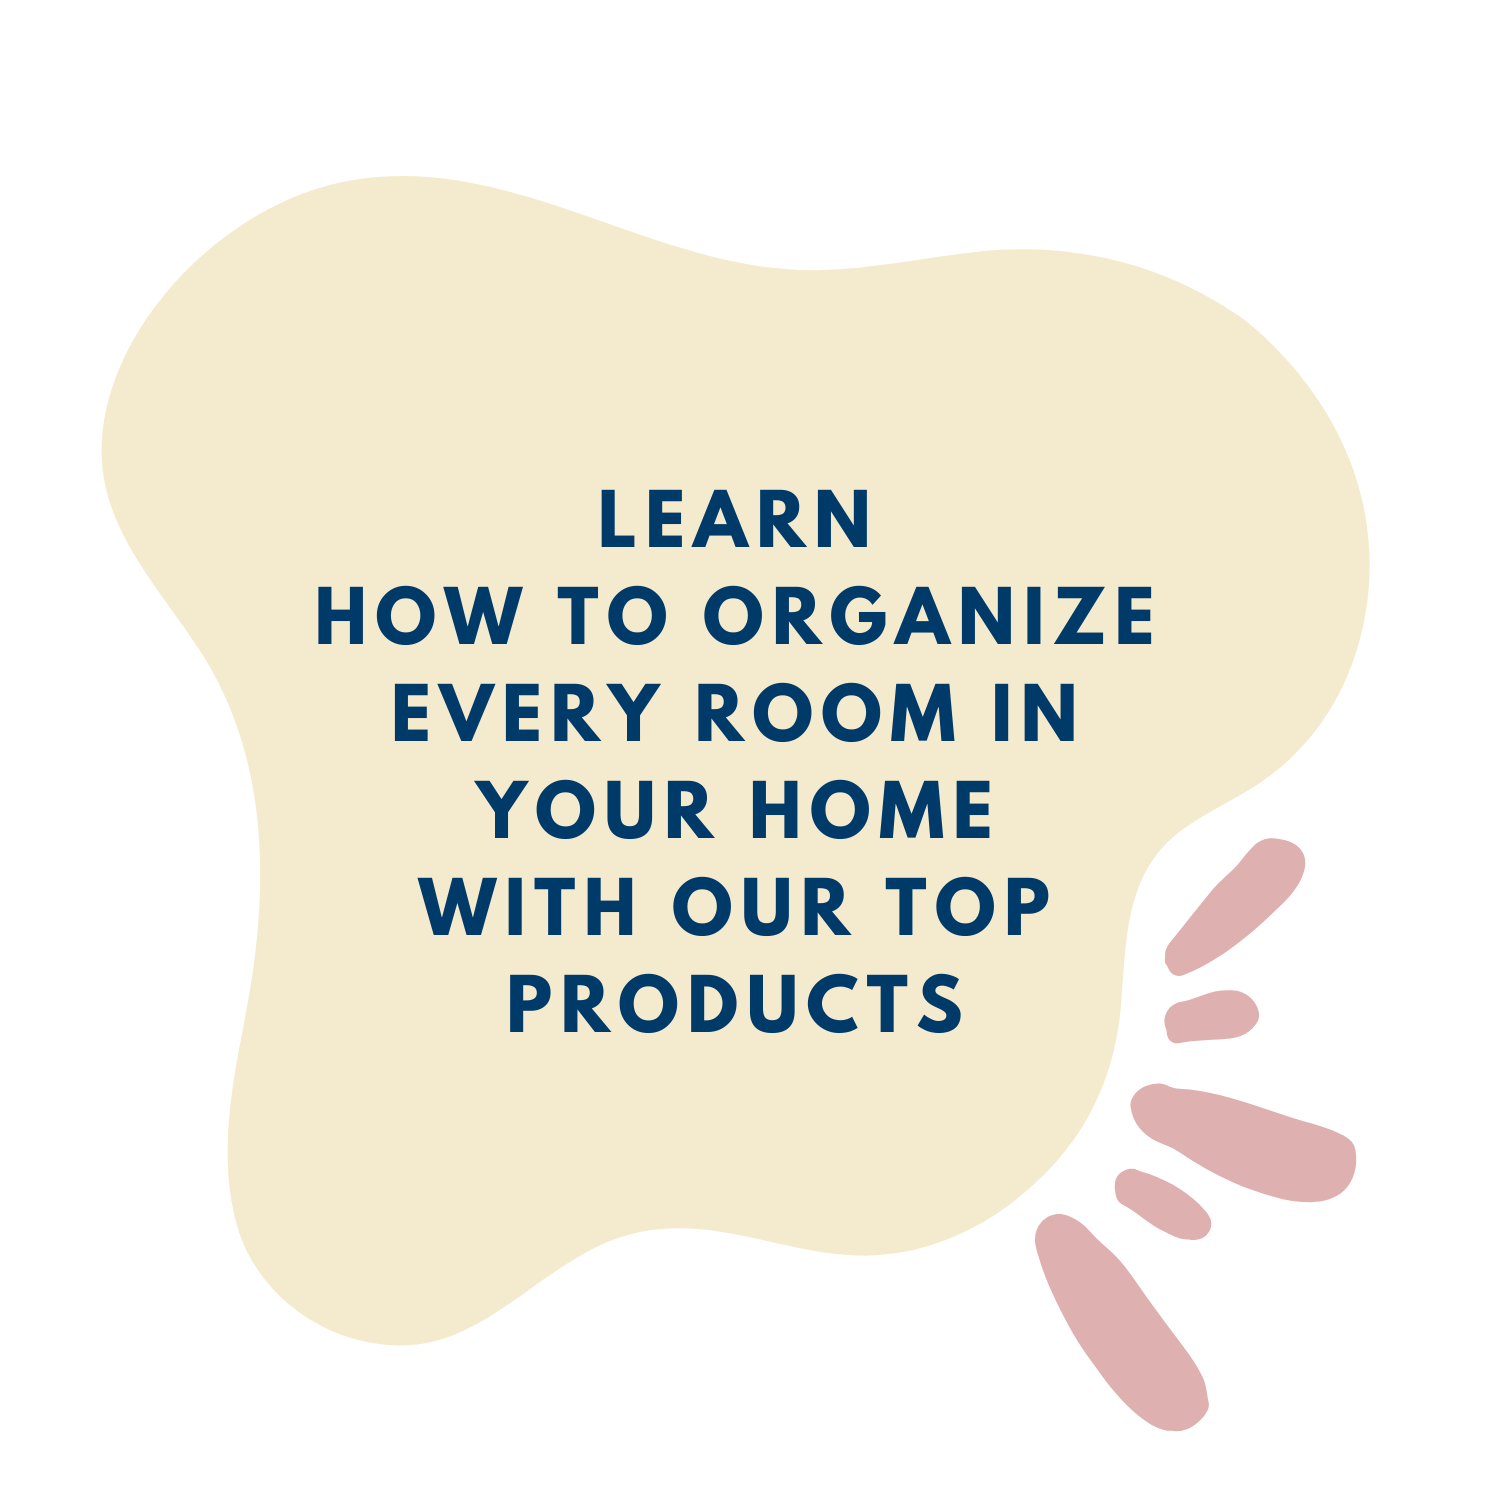 Organize your home room by room